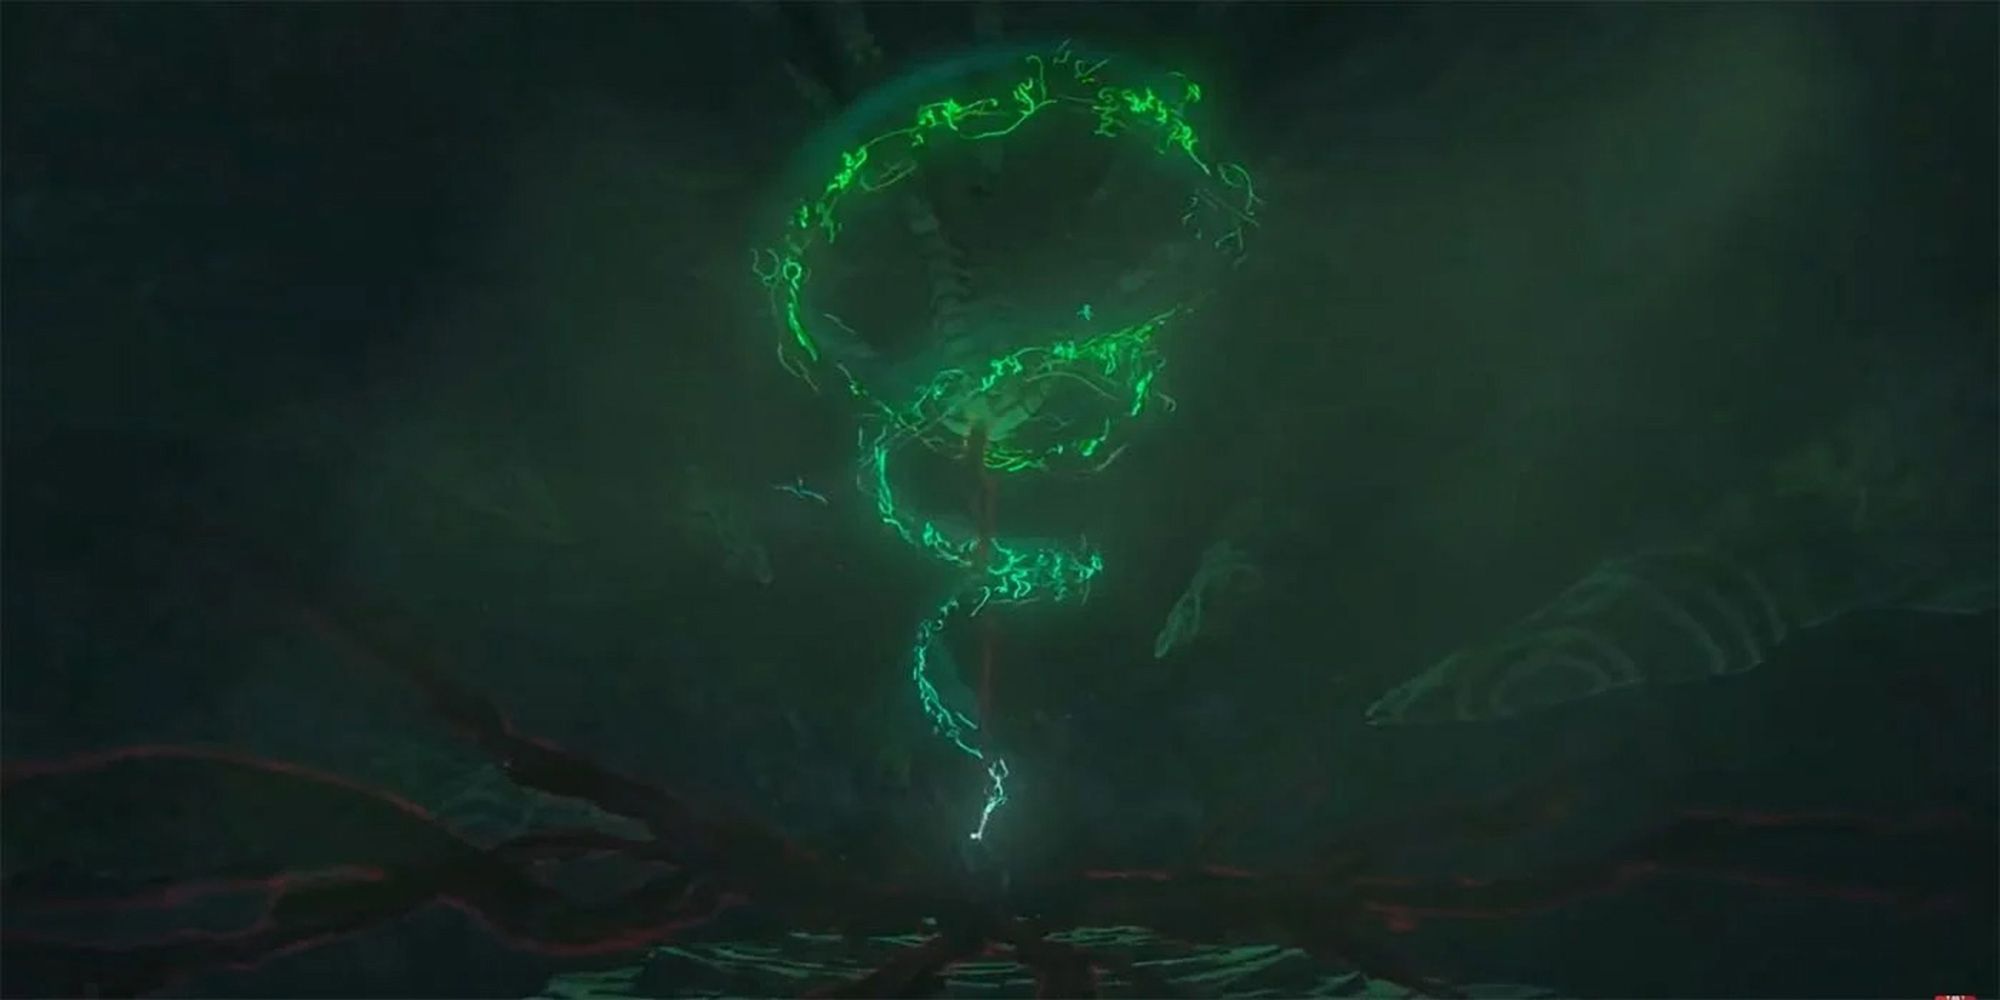 The Legend Of Zelda Breath Of The Wild 2 2019 Reveal Trailer - The Spiraling Energy Sealing The Mummy